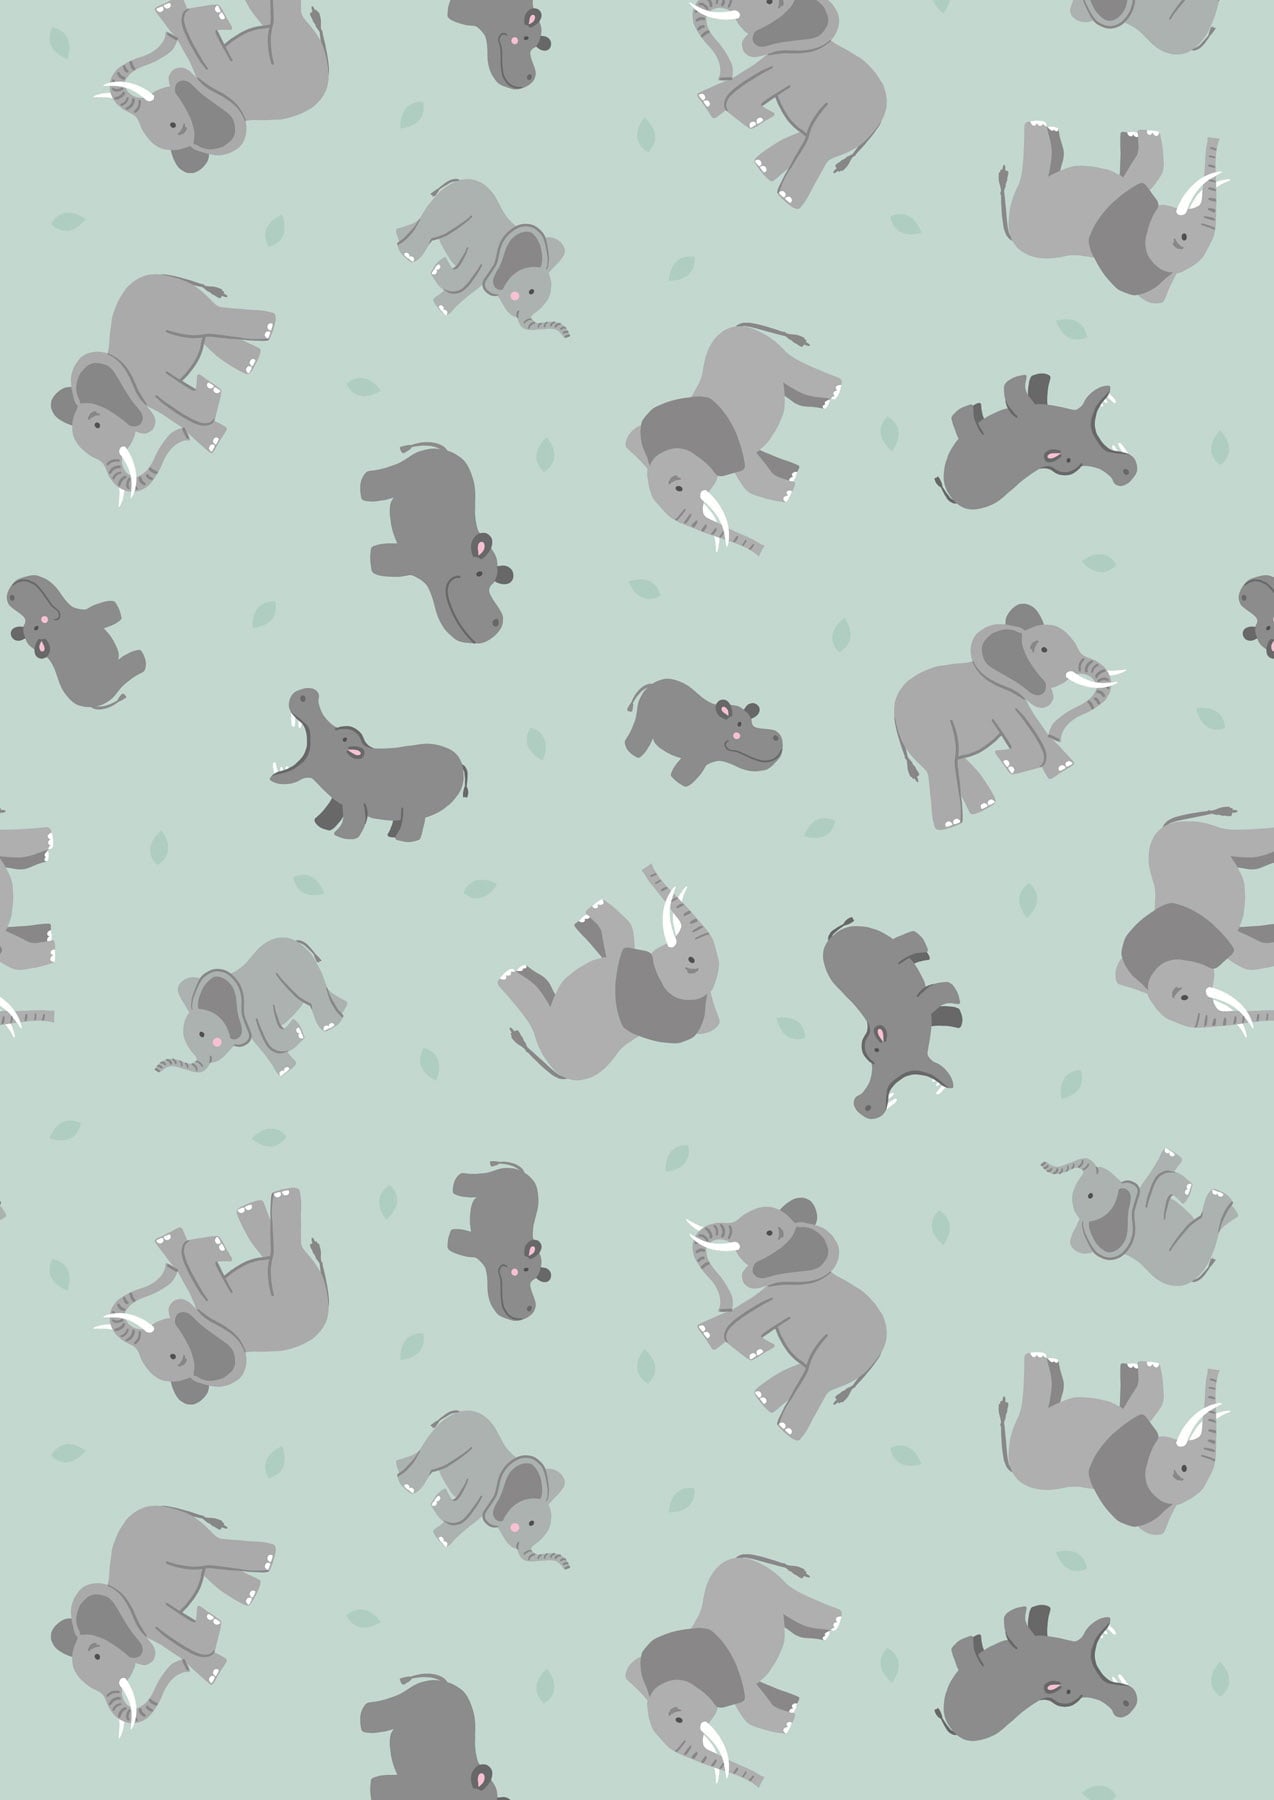 Small Things - Elephants & Hippos in Light Blue